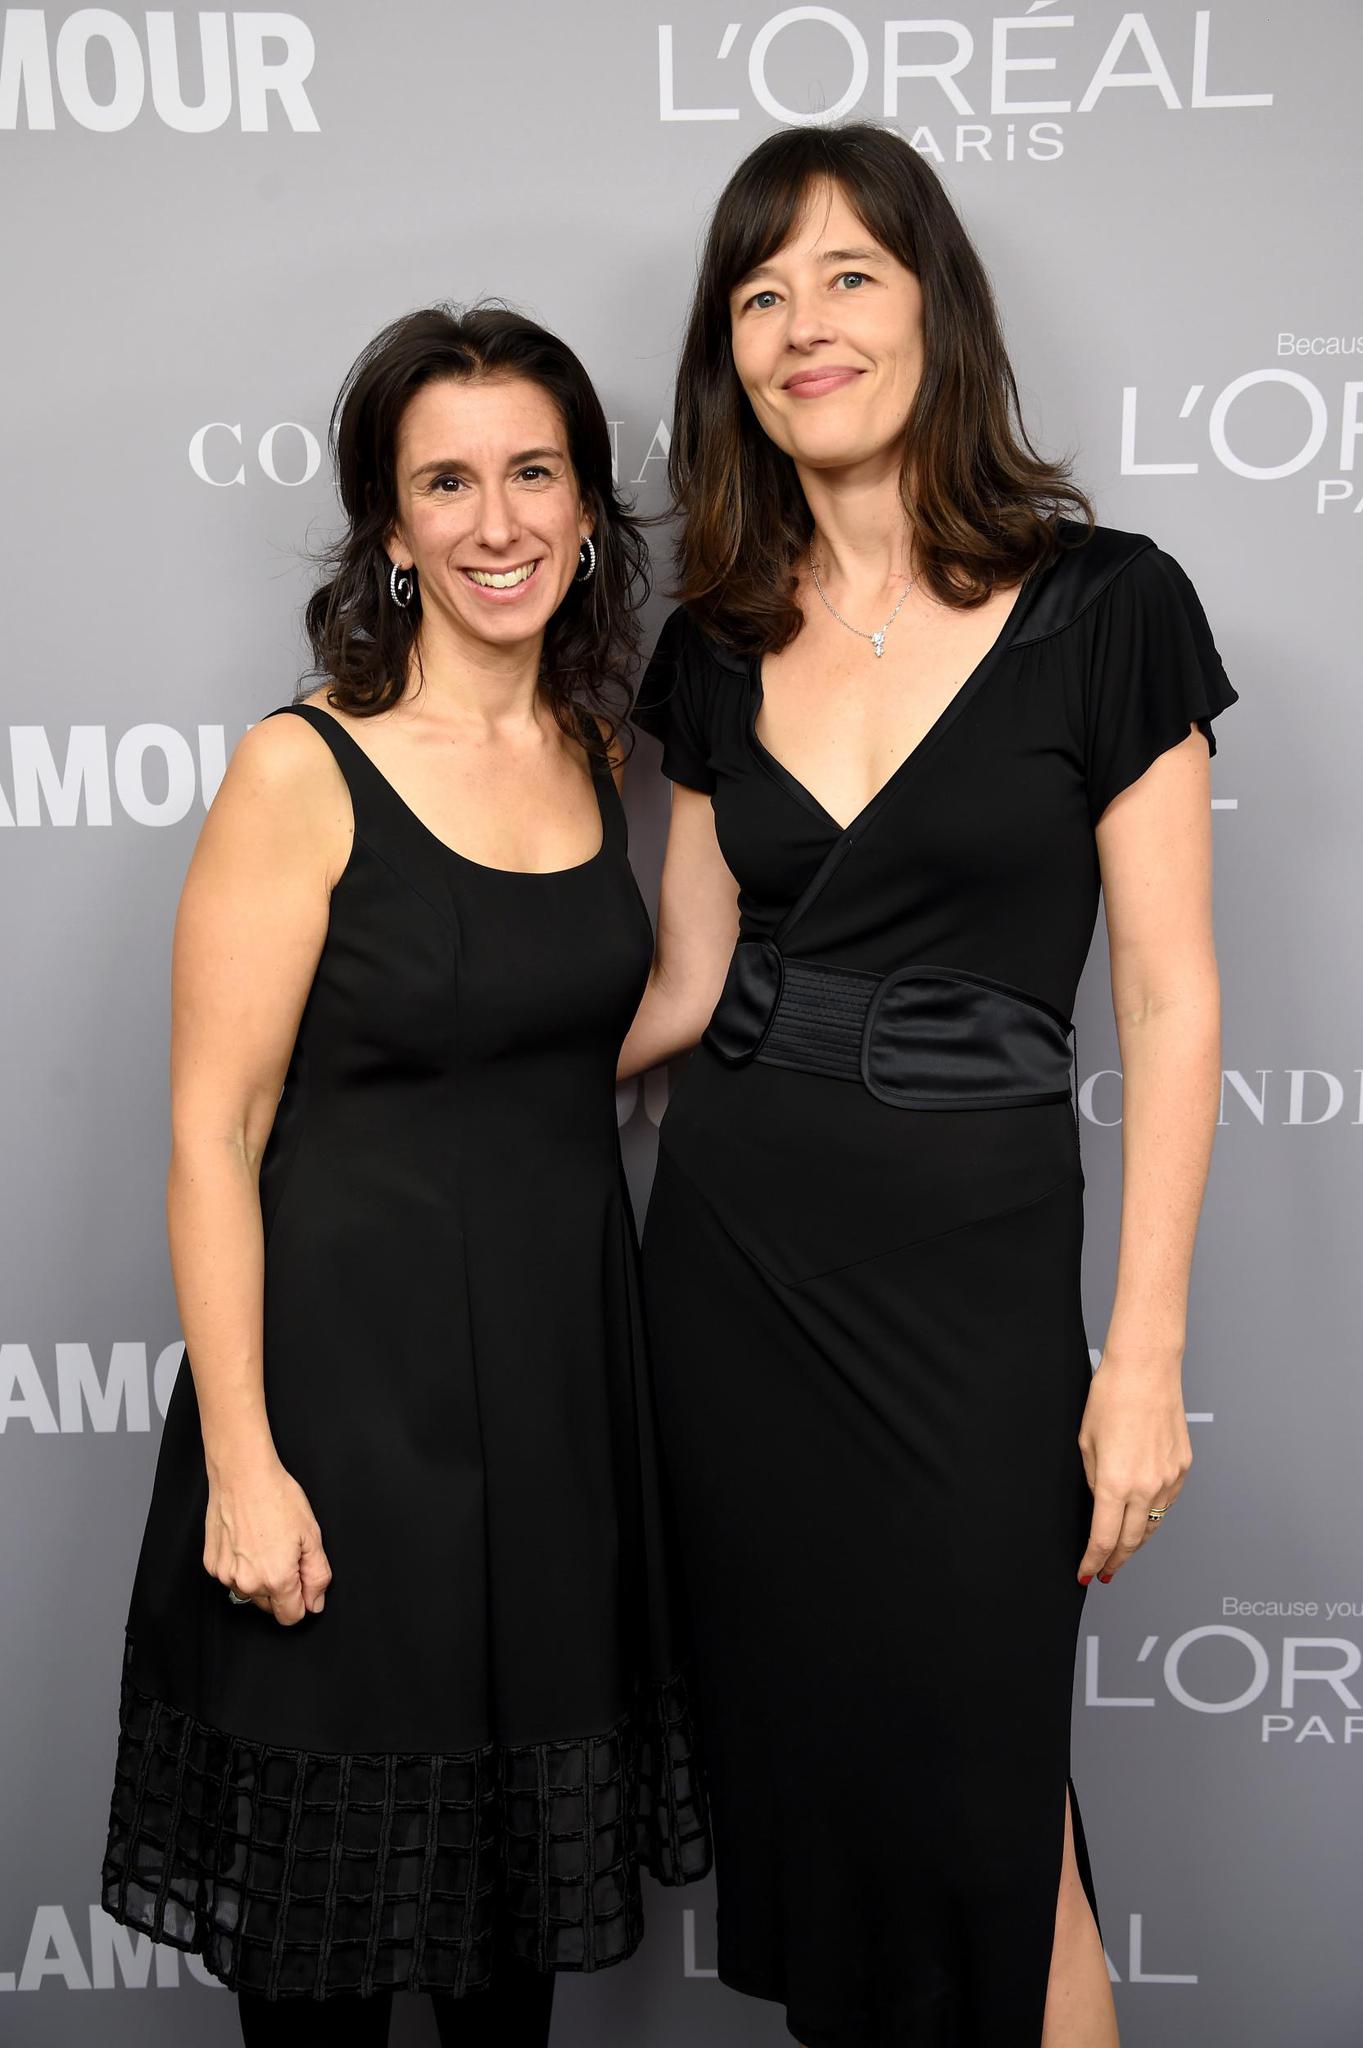 New York Times journalists Jodi Kantor and Megan Twohey exposed Harvey Weinstein’s history of sexual misconduct. (Getty Images for Glamour)